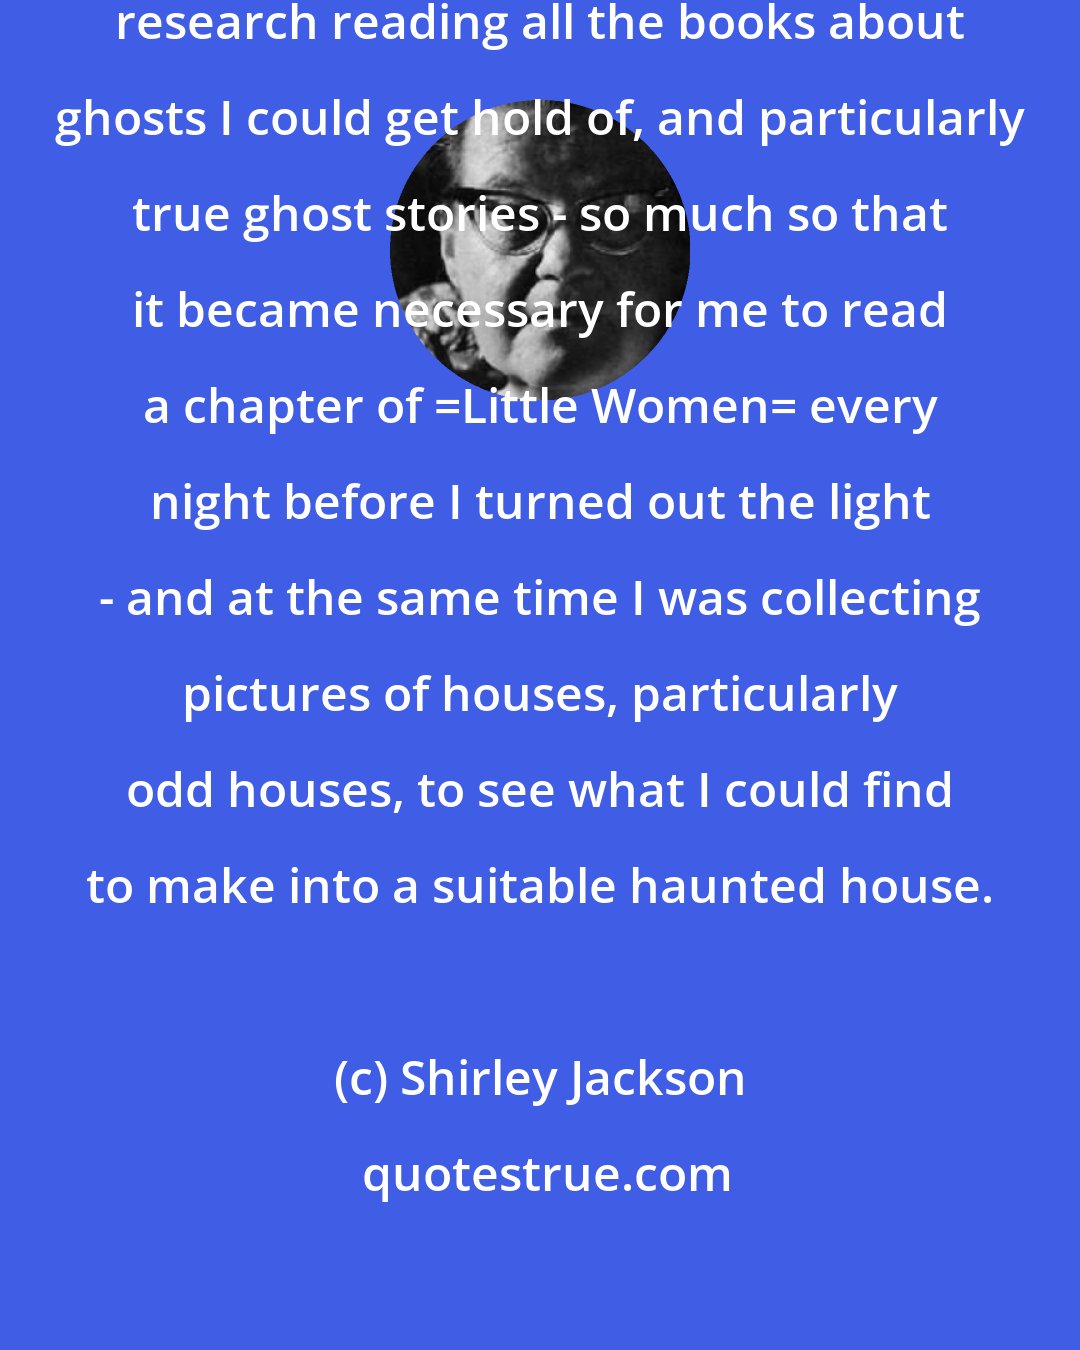 Shirley Jackson: I was already doing a lot of splendid research reading all the books about ghosts I could get hold of, and particularly true ghost stories - so much so that it became necessary for me to read a chapter of _Little Women_ every night before I turned out the light - and at the same time I was collecting pictures of houses, particularly odd houses, to see what I could find to make into a suitable haunted house.